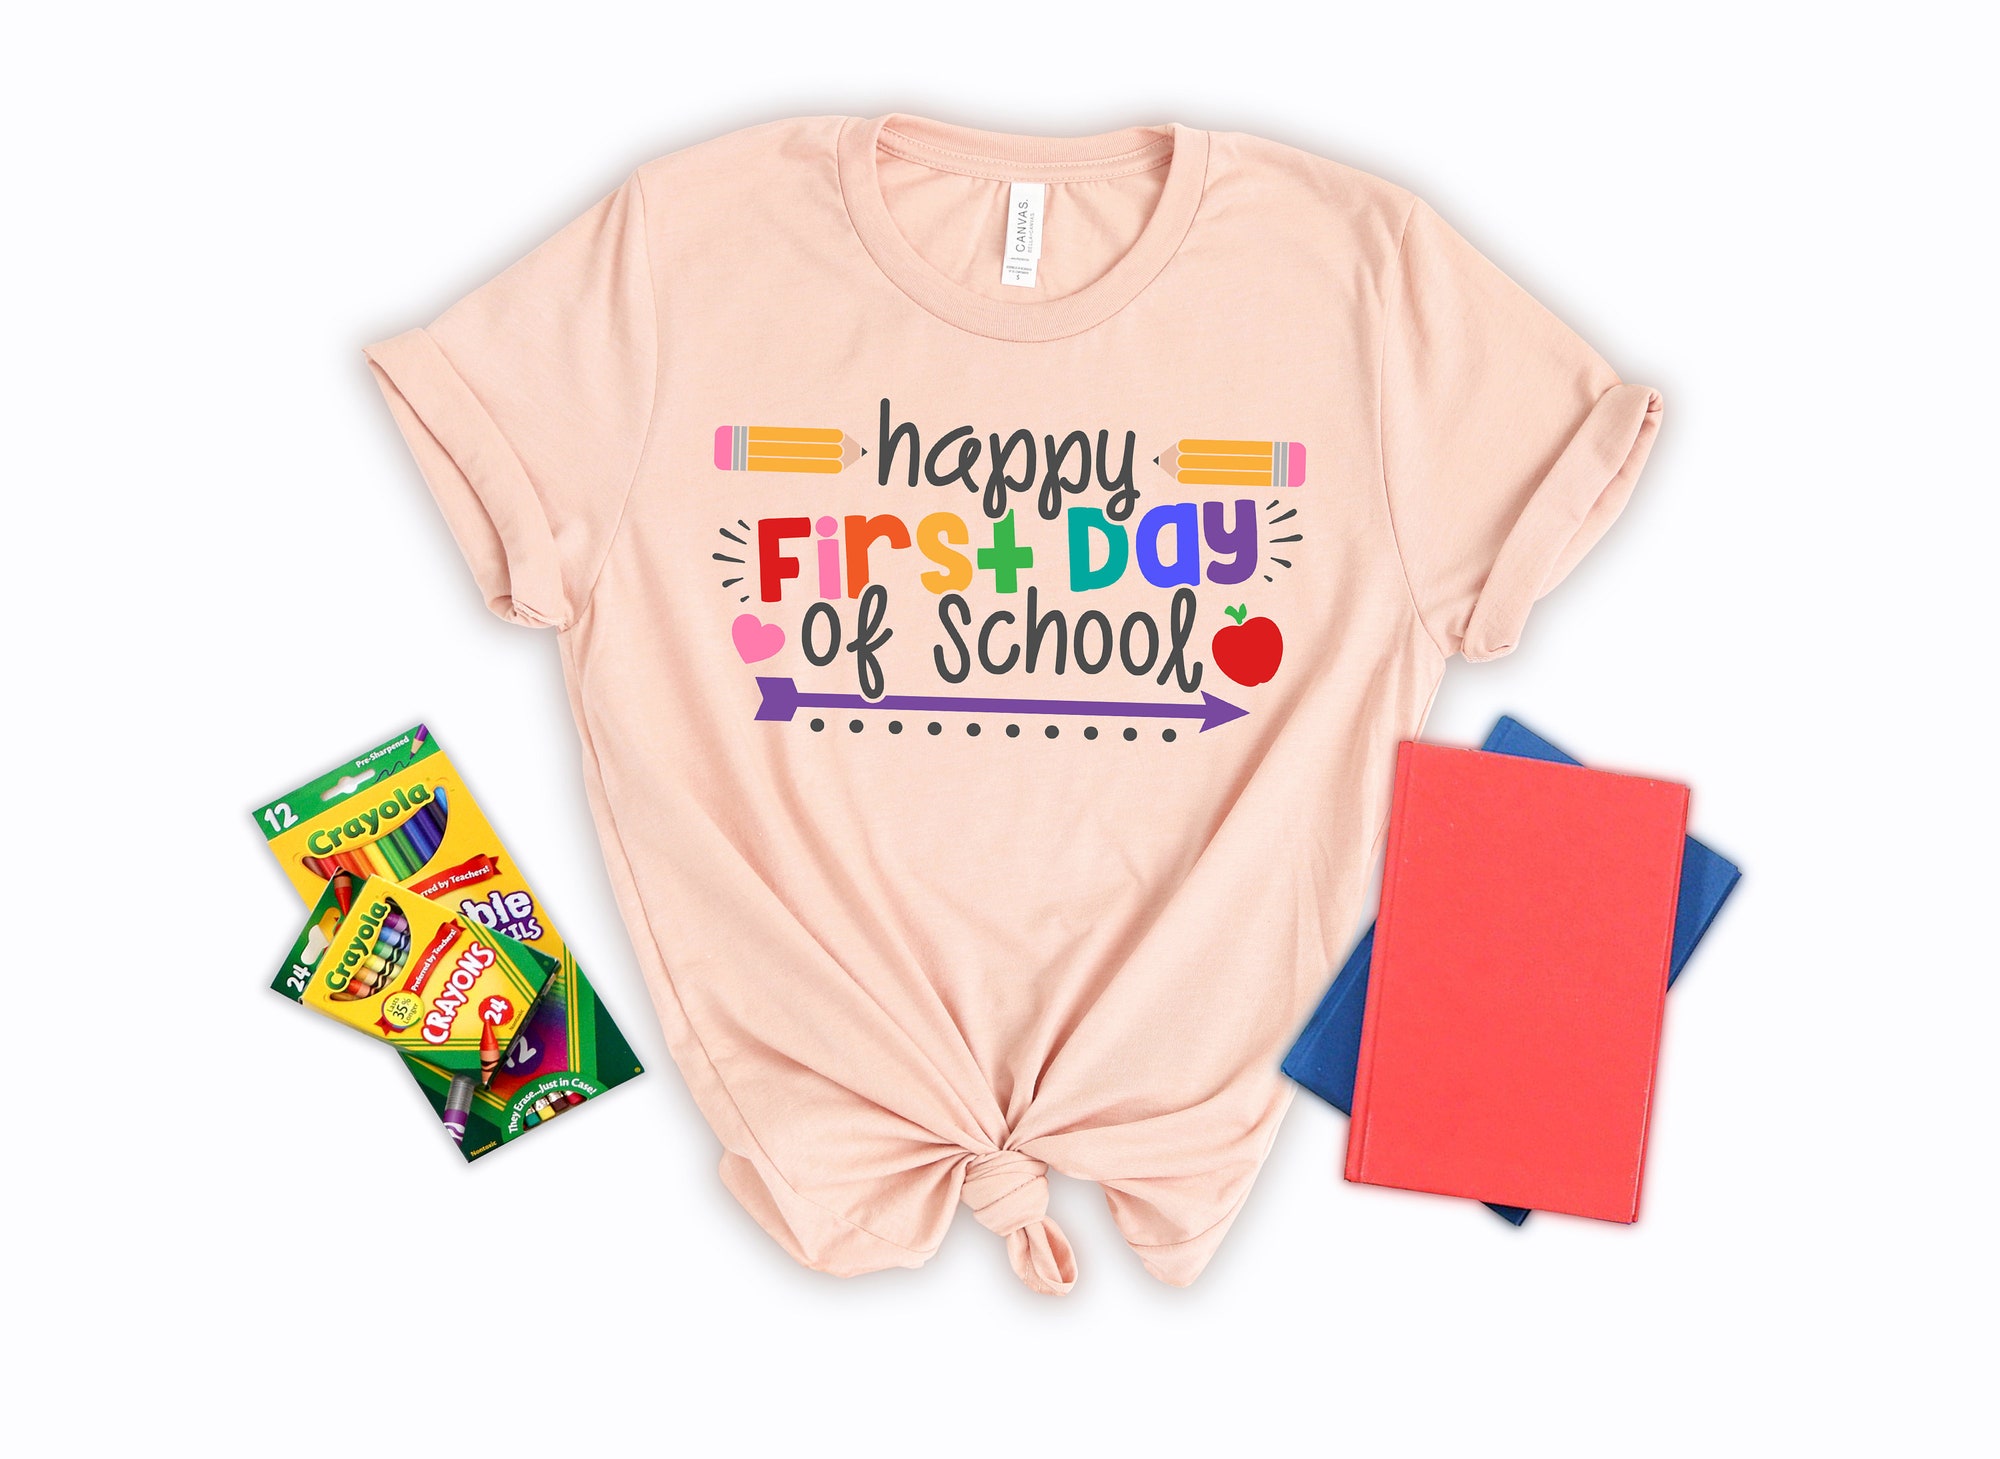 First Day of School Shirt - Happy First Day of School Shirt